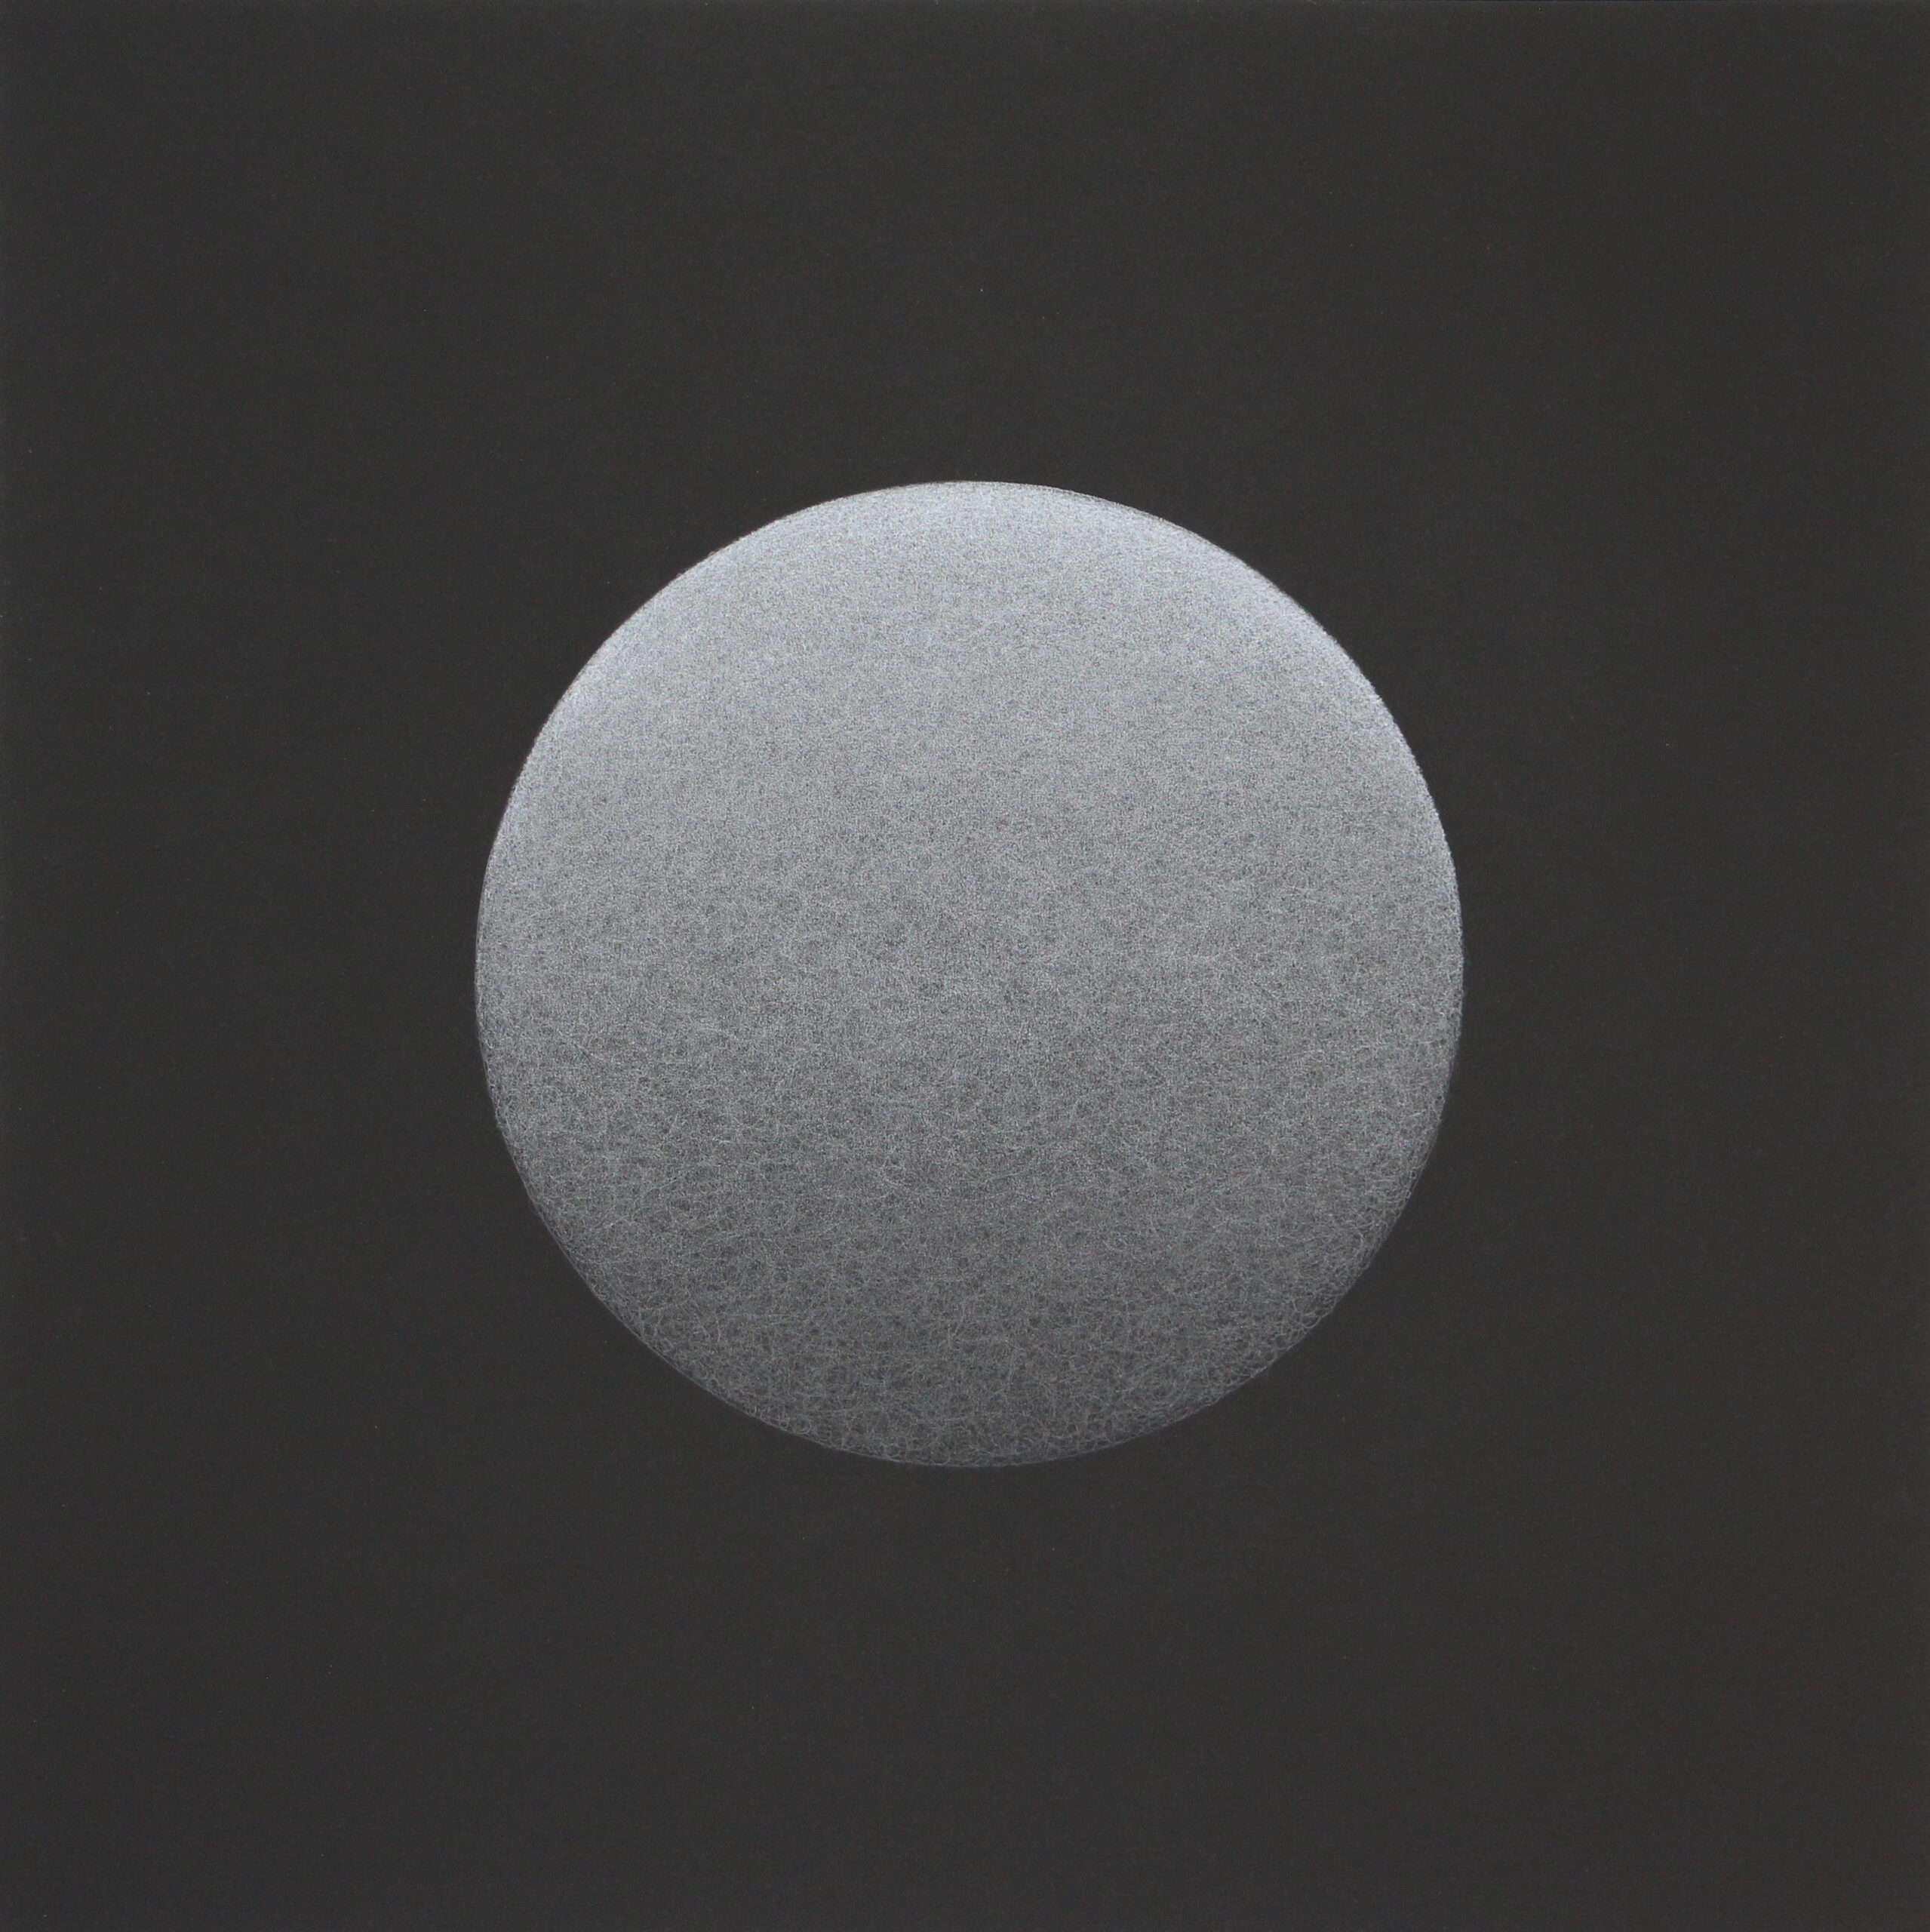 Gray Sphere 3 , 2021, colored pencil on museum board, 20 x 20"